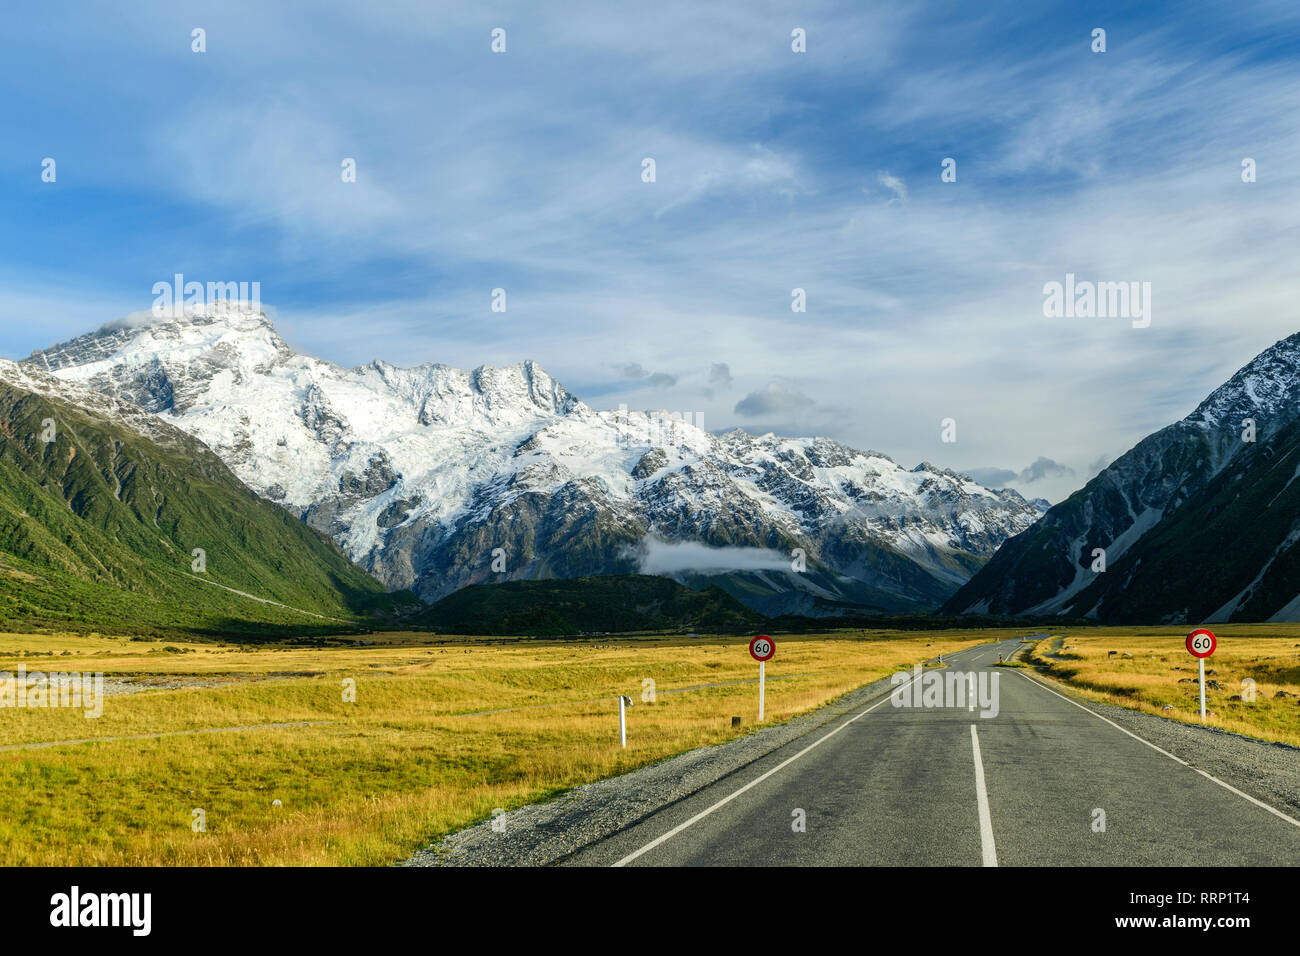 Oceania, New Zealand, Aotearoa, South Island, Mount Cook National Park, Highway to Mount Cook, Stock Photo